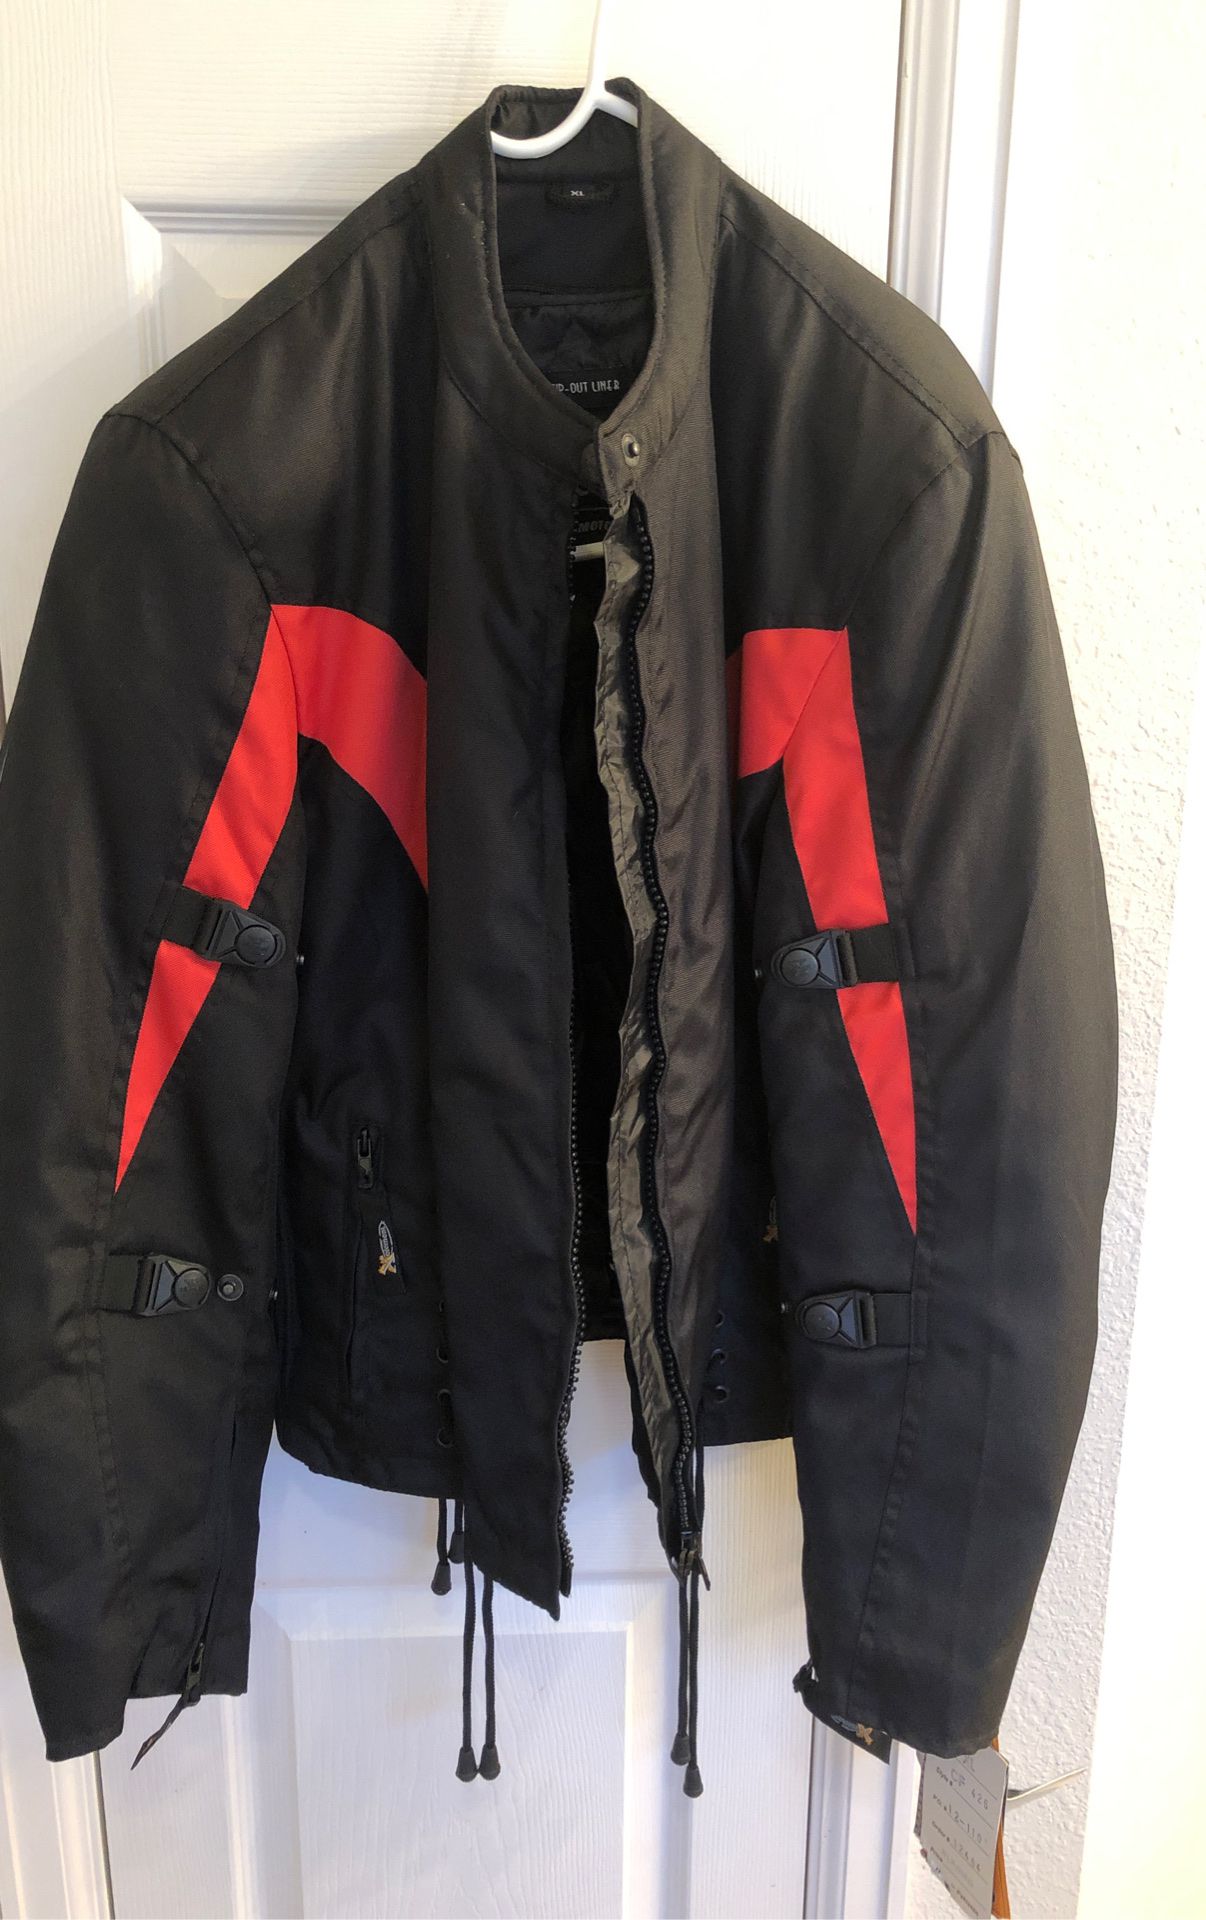 Men’s XL black/red motorcycle jacket, brand new, tags still on.